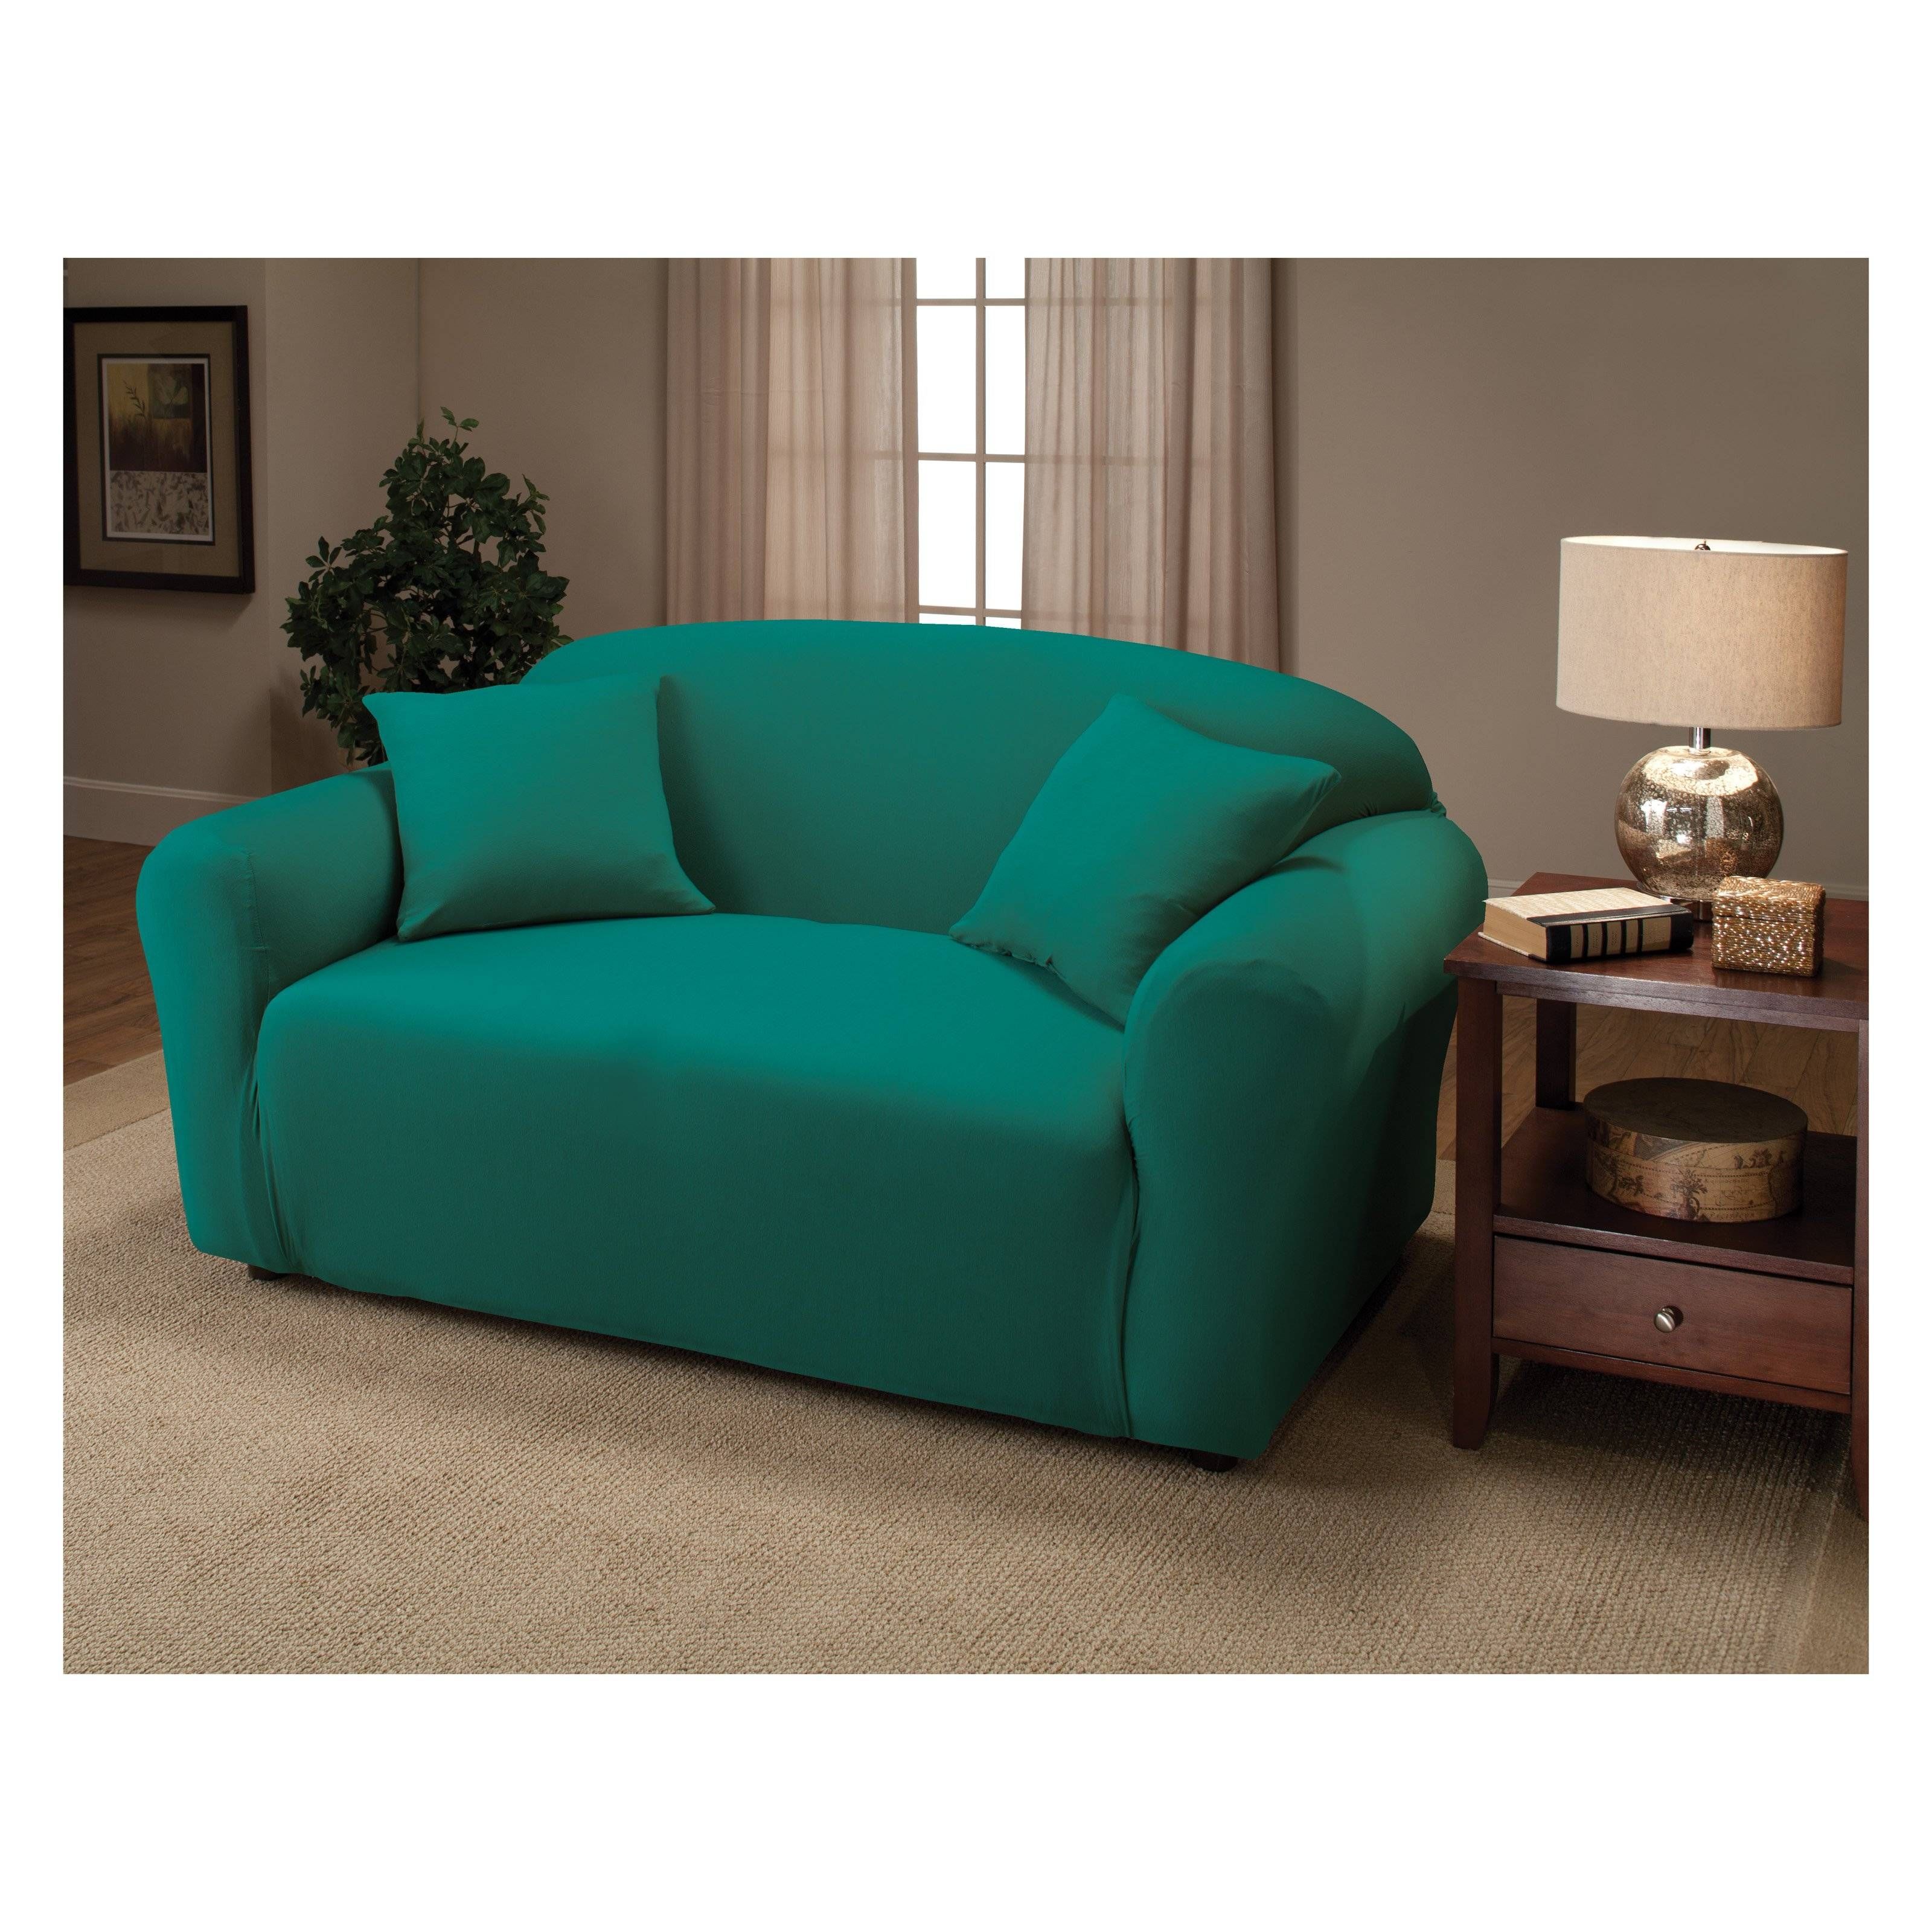 Furniture: Give Your Furniture Makeover With Sofa Recliner Covers With Regard To Teal Sofa Slipcovers (View 3 of 30)